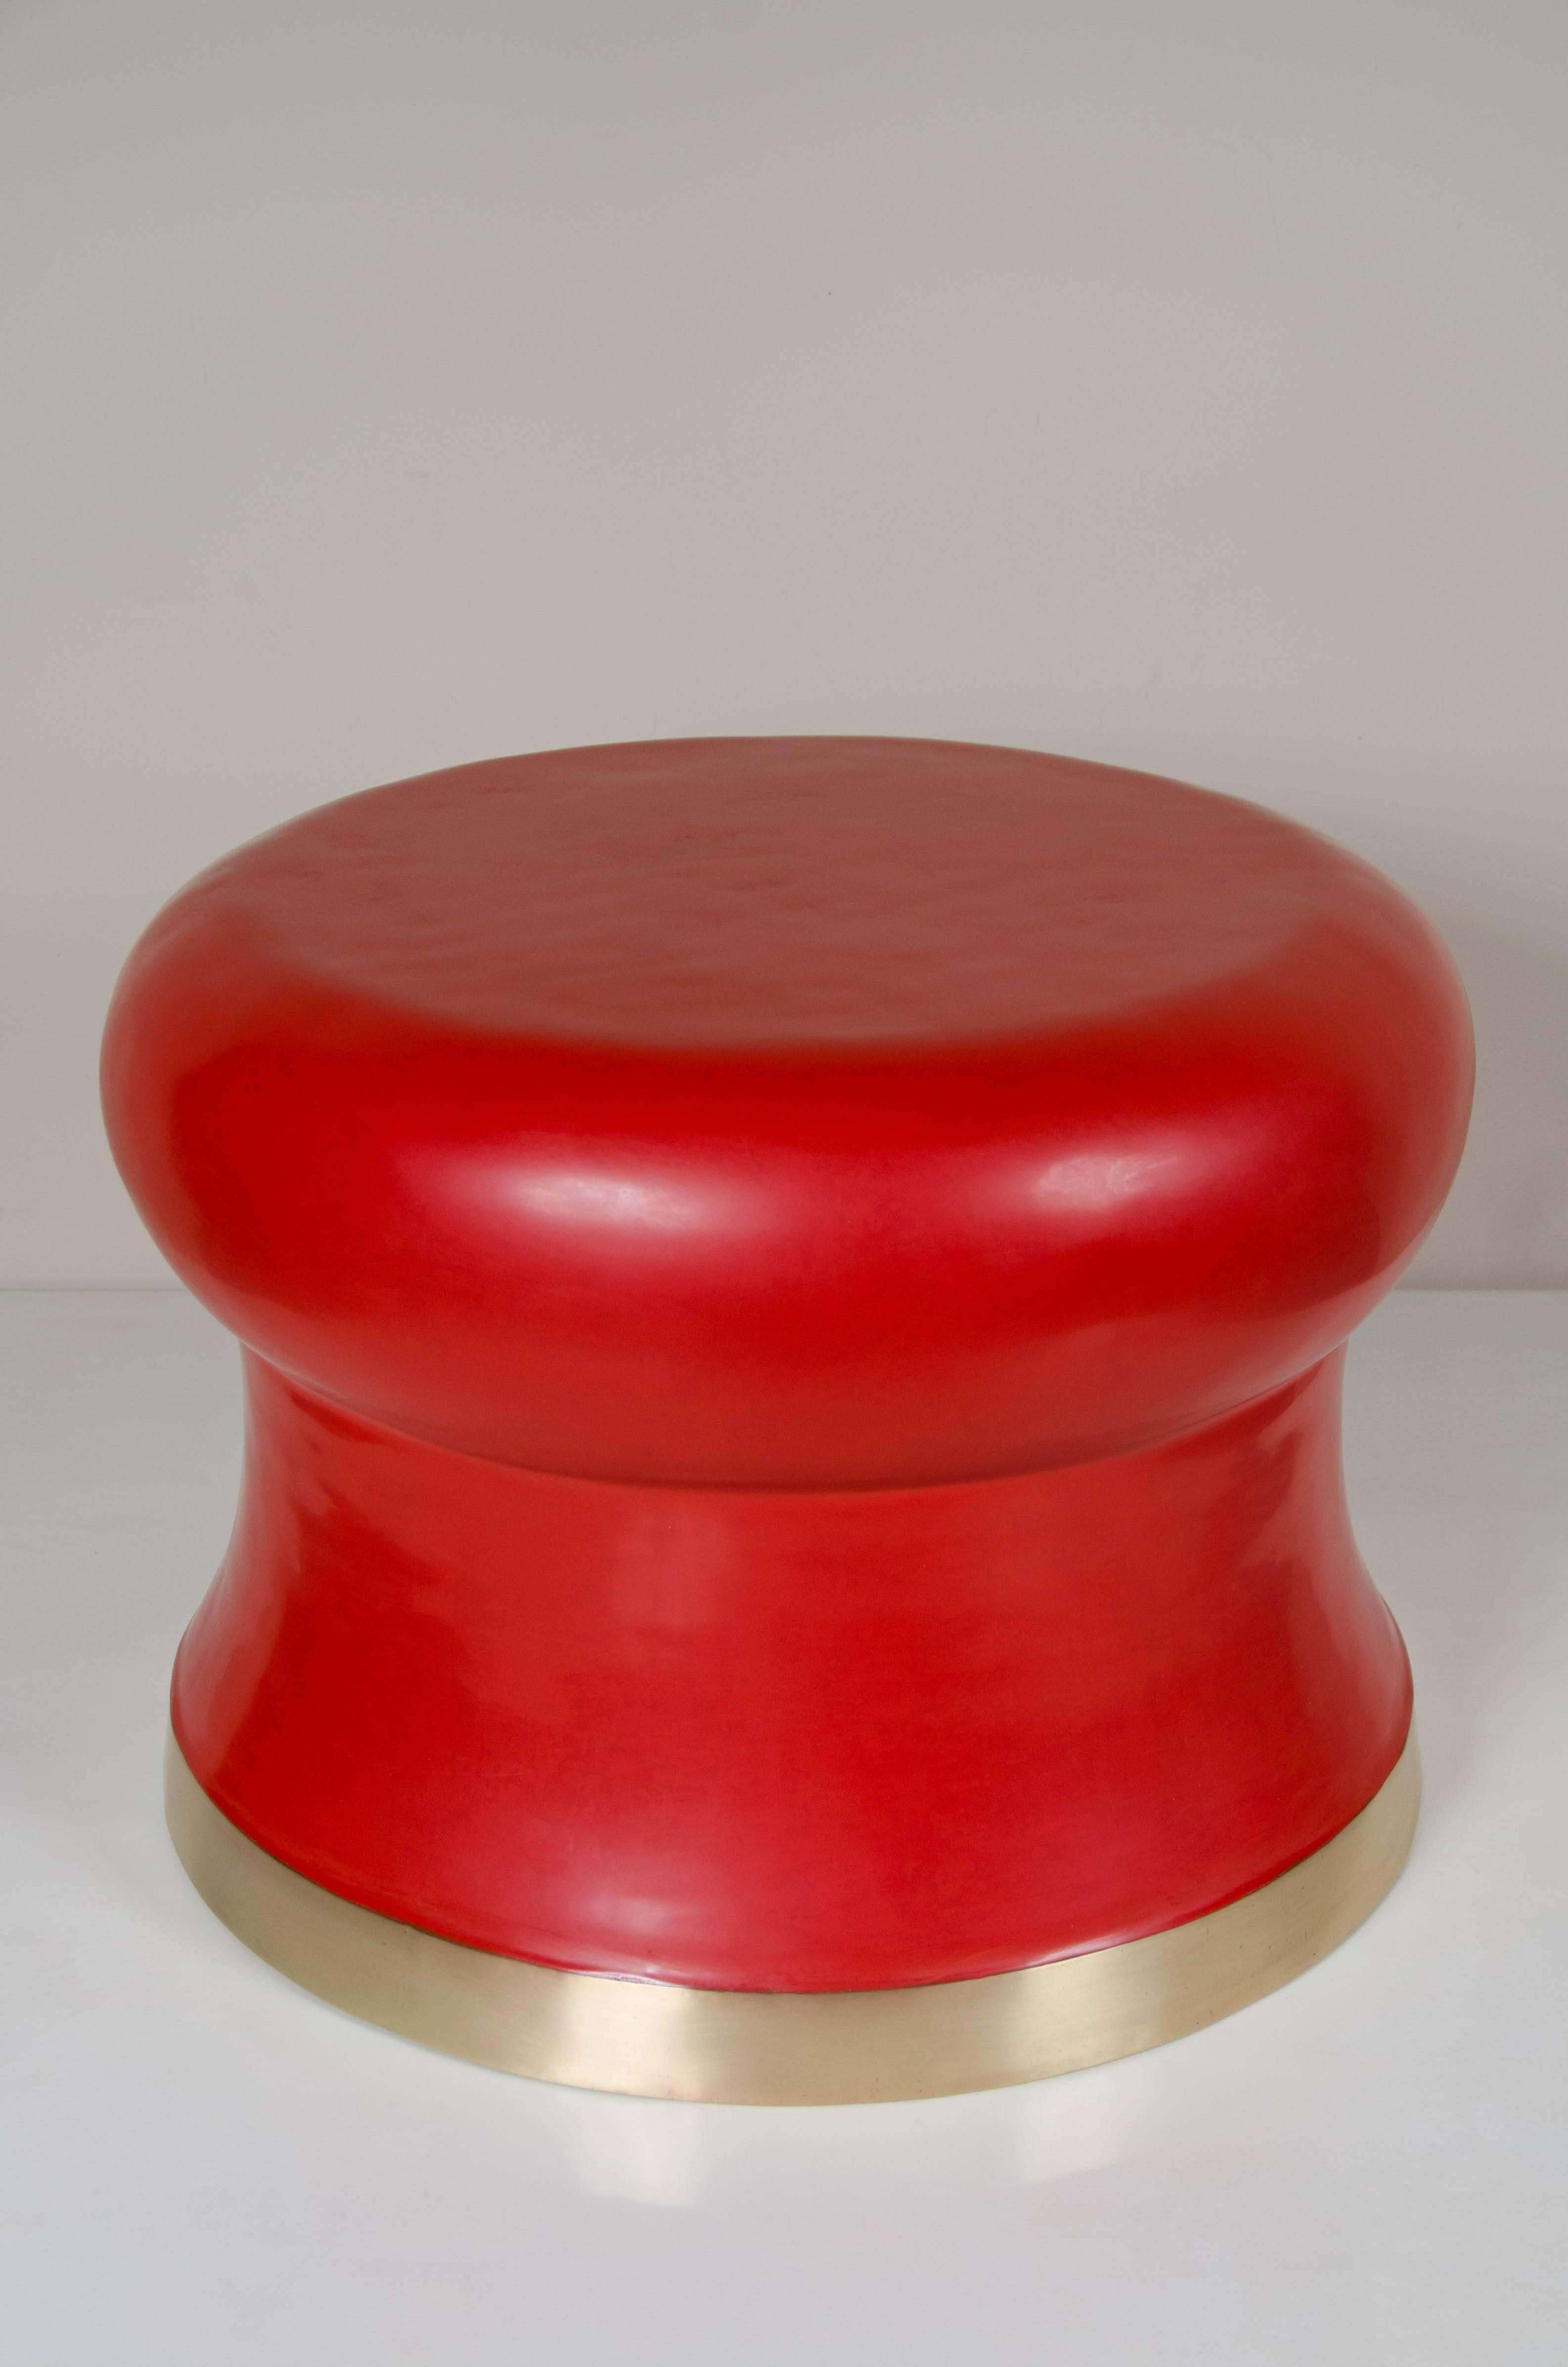 Dian drum stool.
Red lacquer.
Brass trim.
Hand Repoussé.

Lacquer is a technique that dates back to the Shang dynasty, circa 1600-1100 B.C. The pieces are made with at least 1960 coats of organic lacquer. Each layer of lacquer is applied with